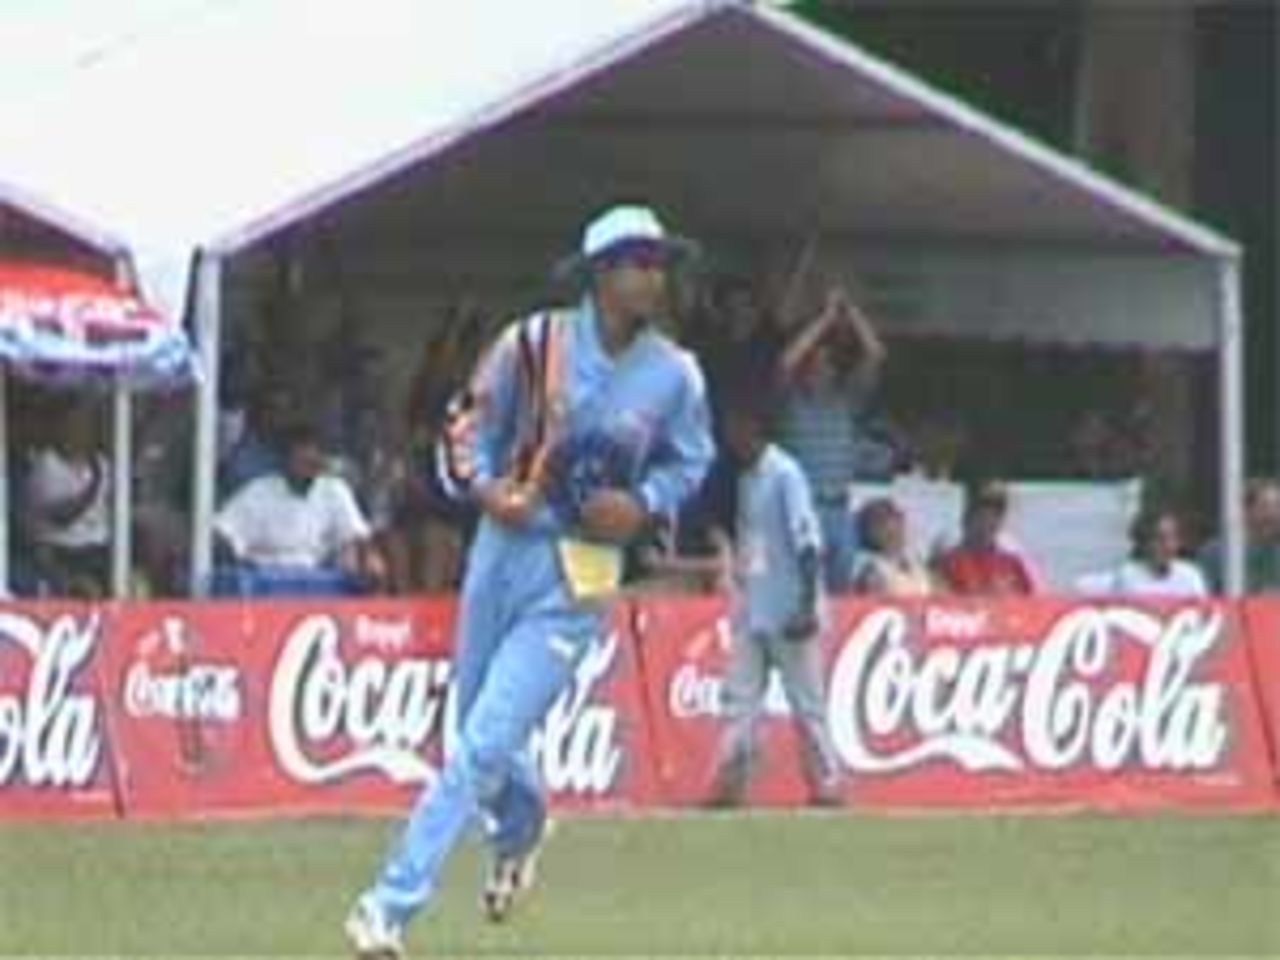 Chopra comfortably takes a catch to dismiss Jacobs, India v West Indies (3rd ODI), Coca-Cola Singapore Challenge, 1999-2000, Kallang Ground, Singapore, 5 Sep 1999.